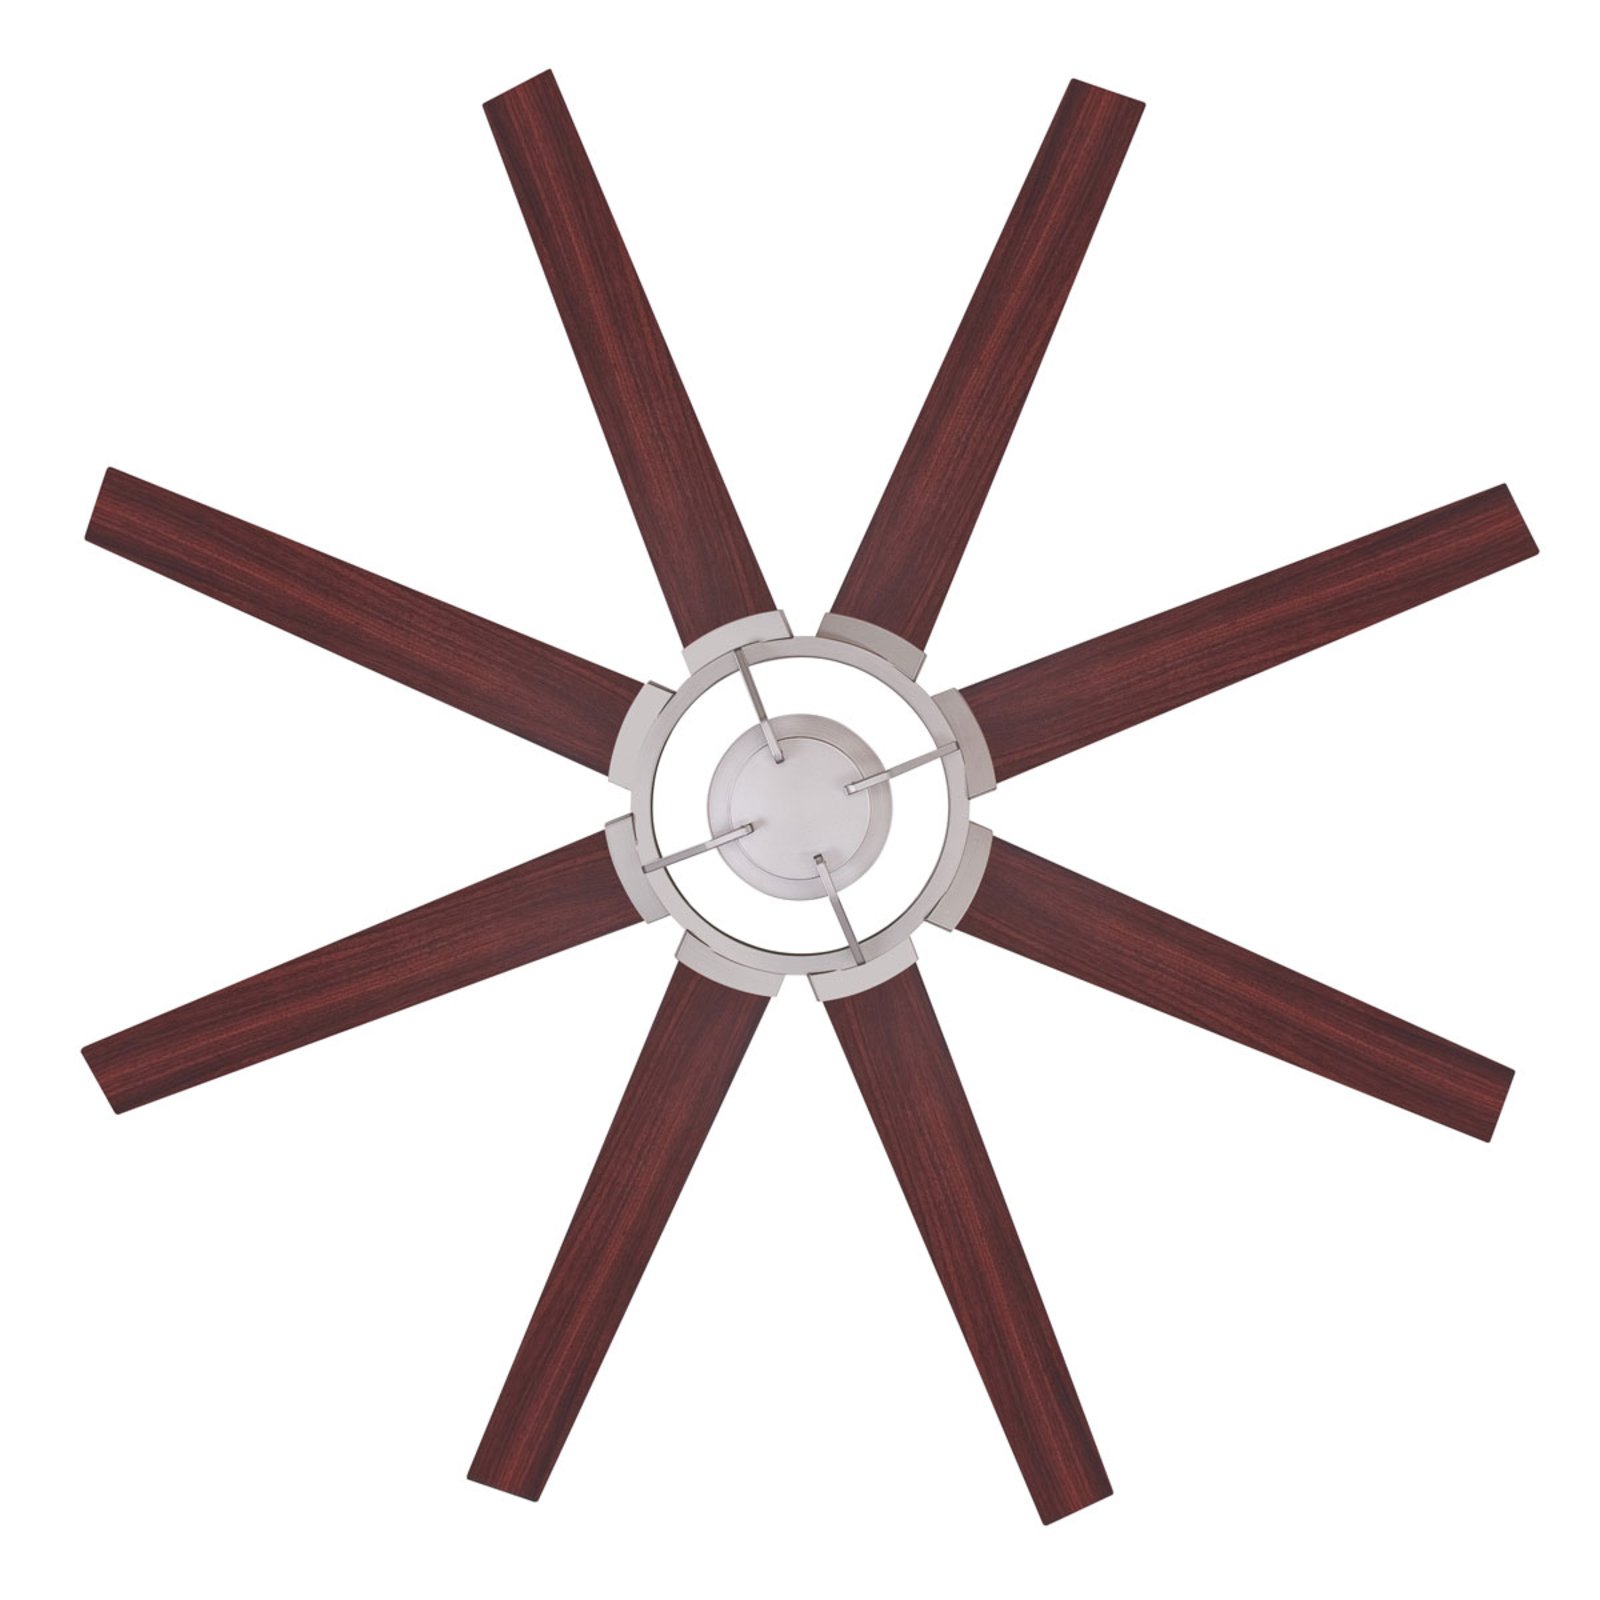 Westinghouse Stoneford ceiling fan, 8 blades